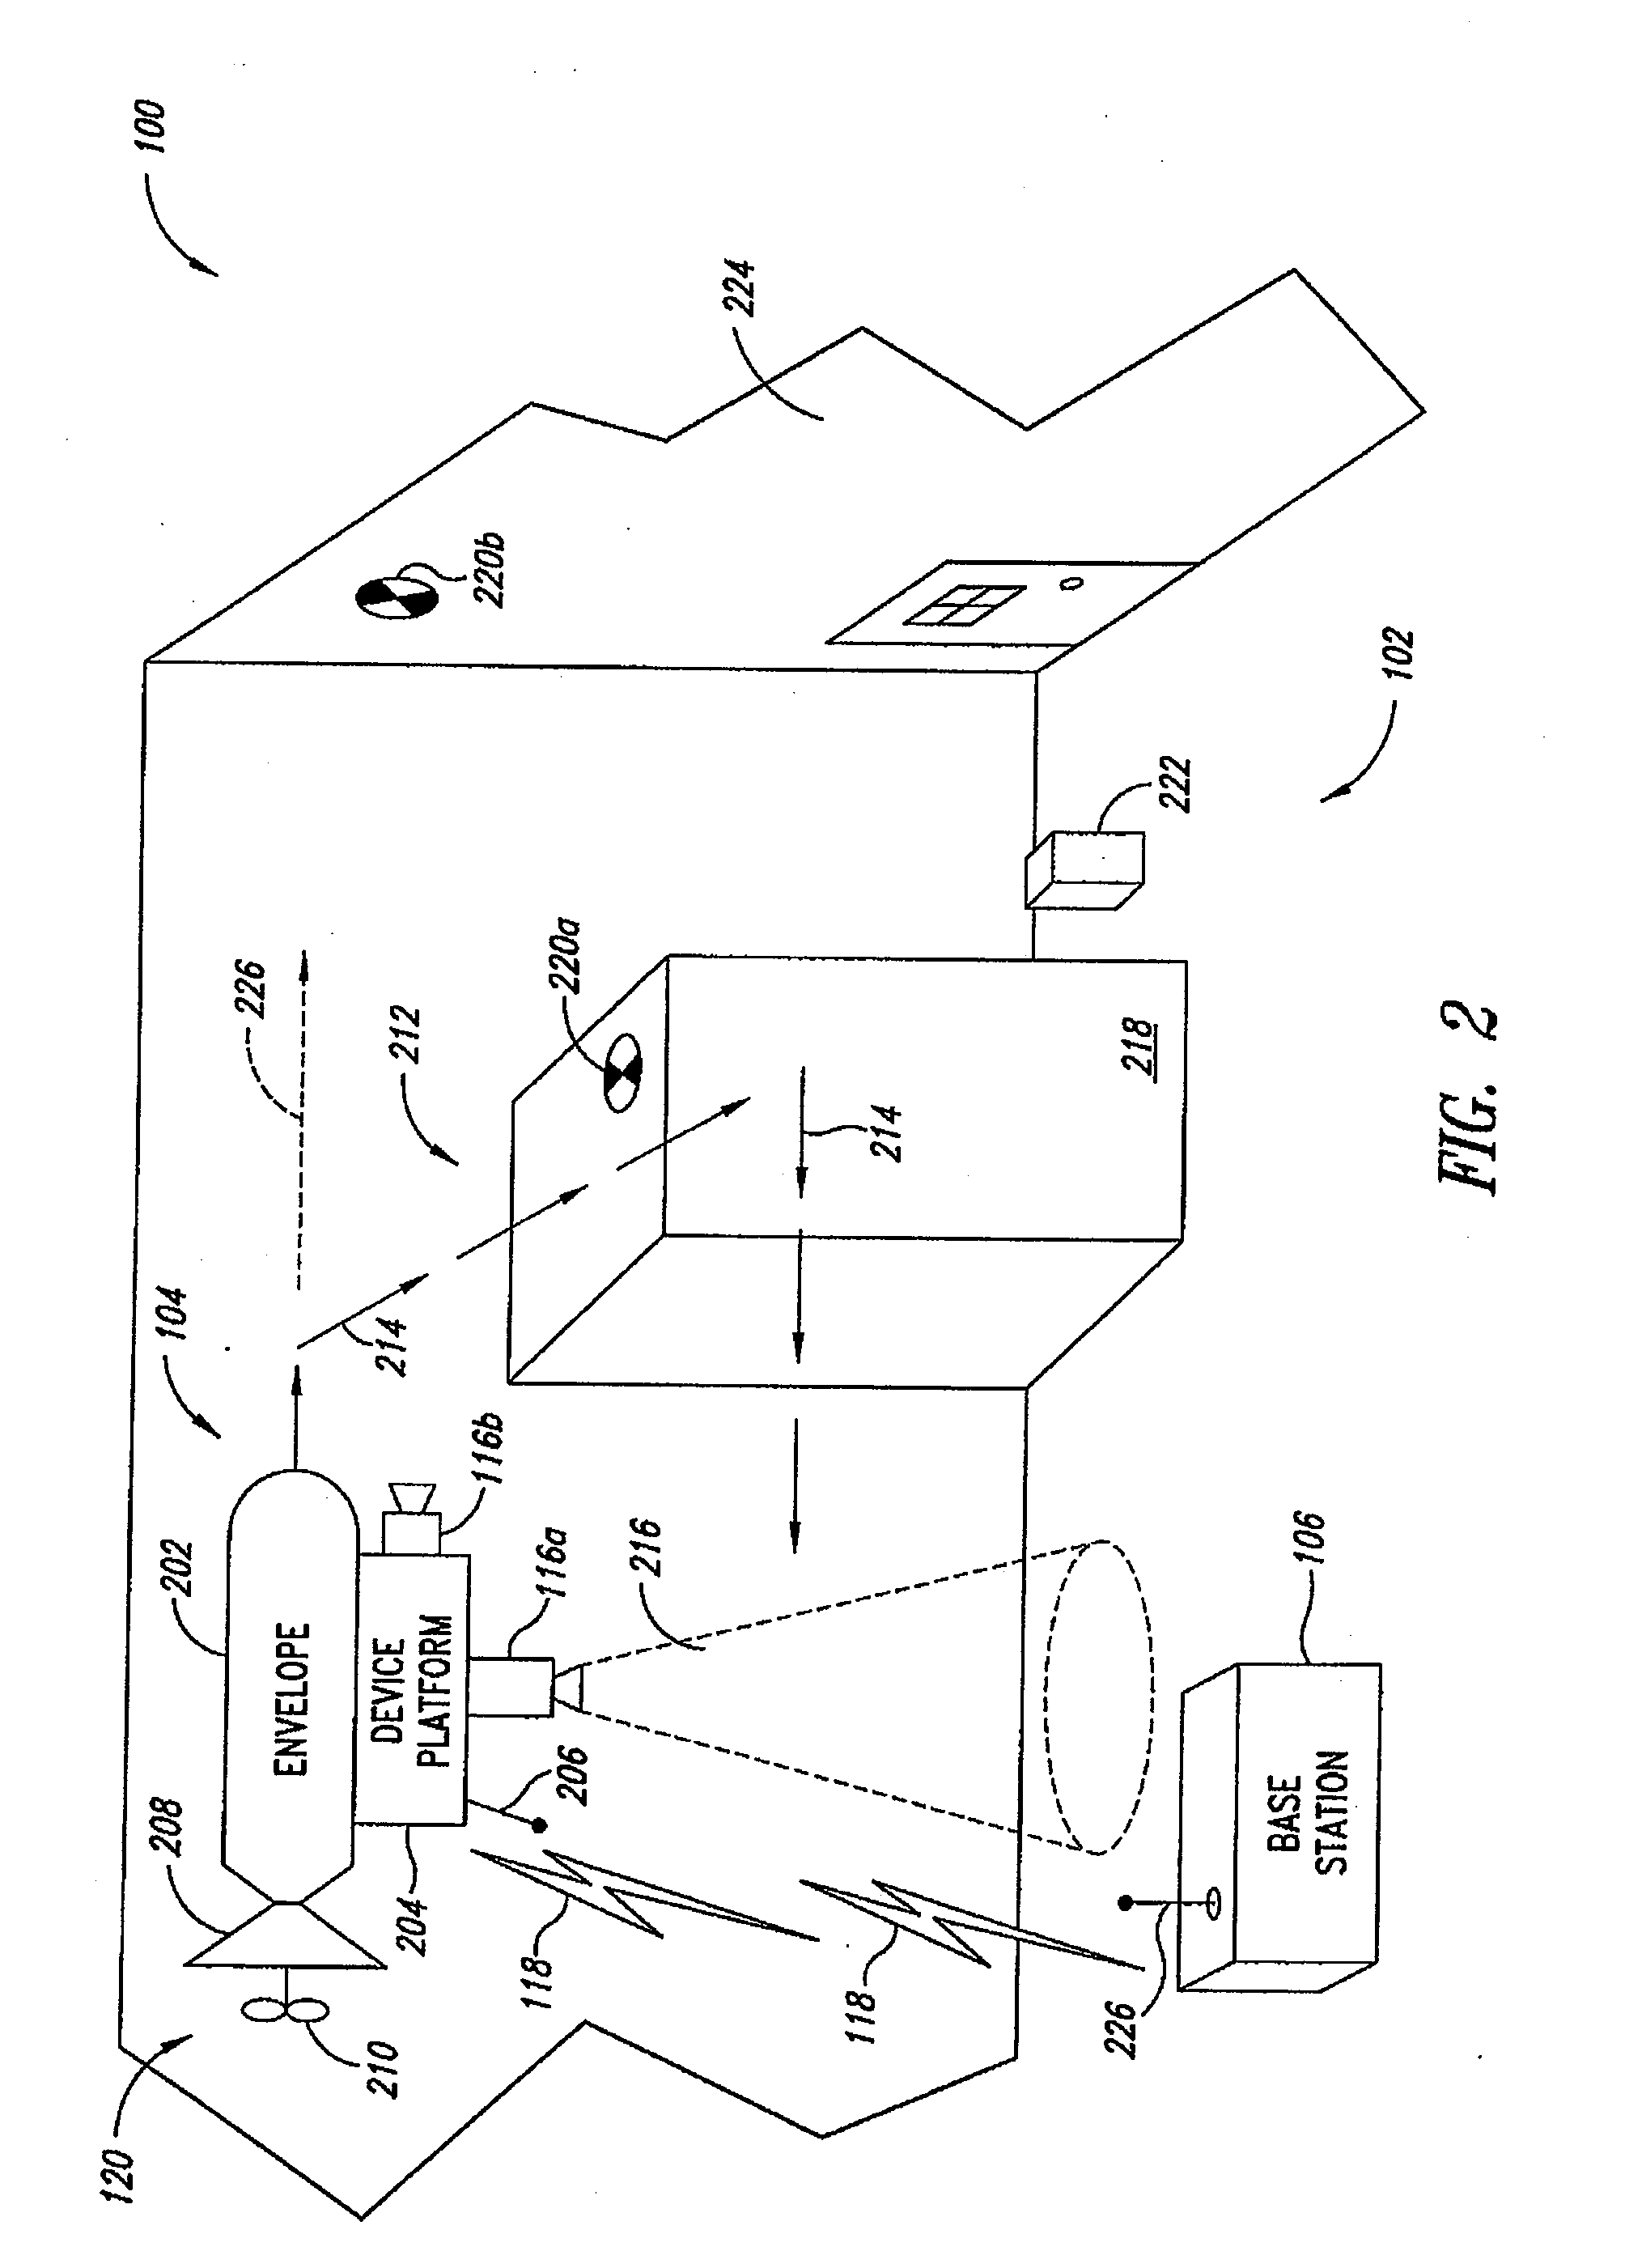 System and method of aerial surveillance